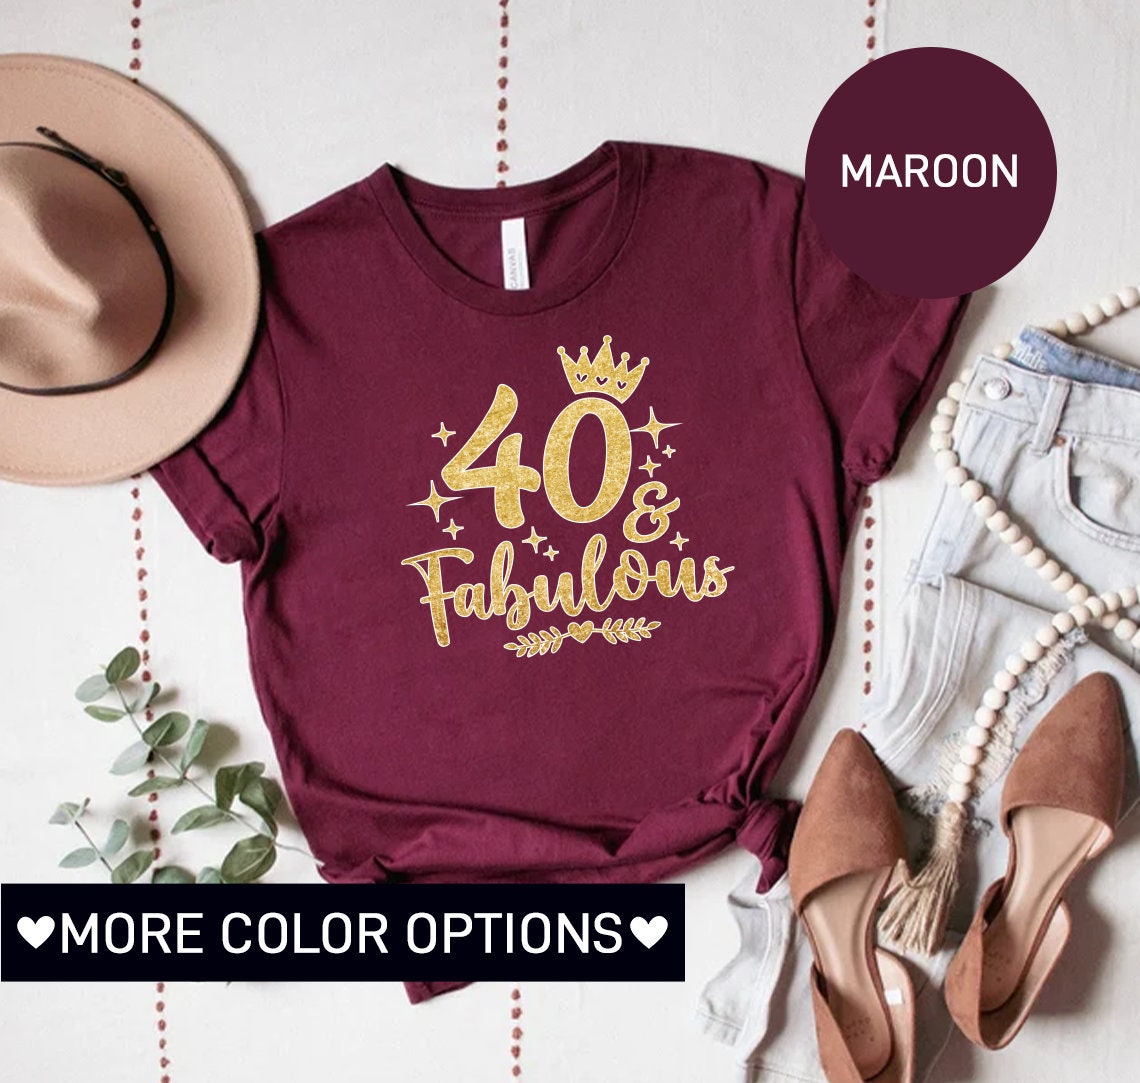 Discover 40th Birthday Shirt for Women, 40 and Fabulous TShirt for 40th Birthday T-Shirt